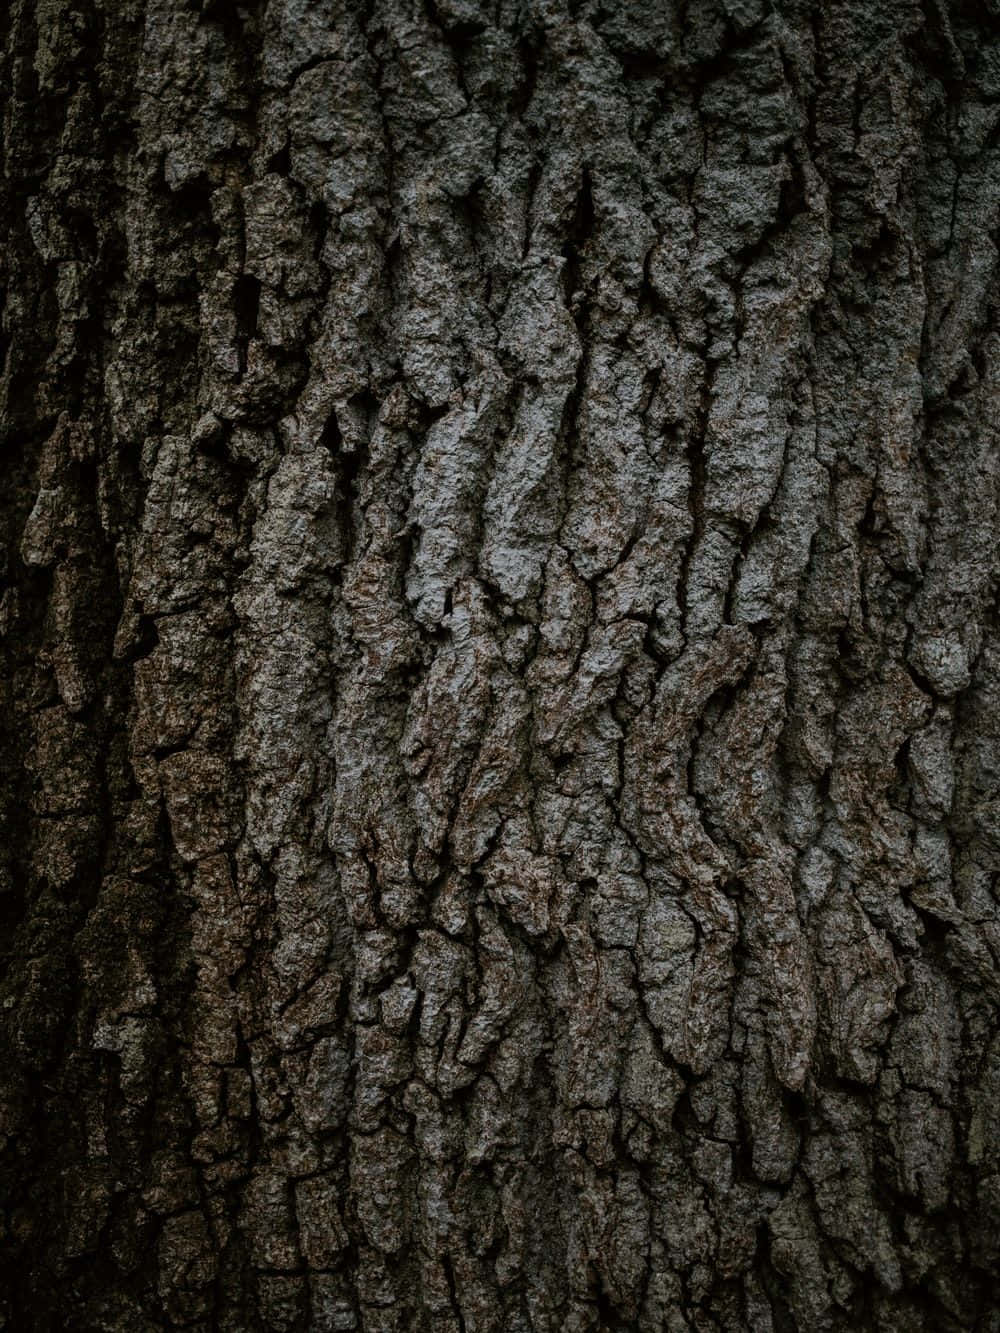 Rough Skin Tree Trunk Picture